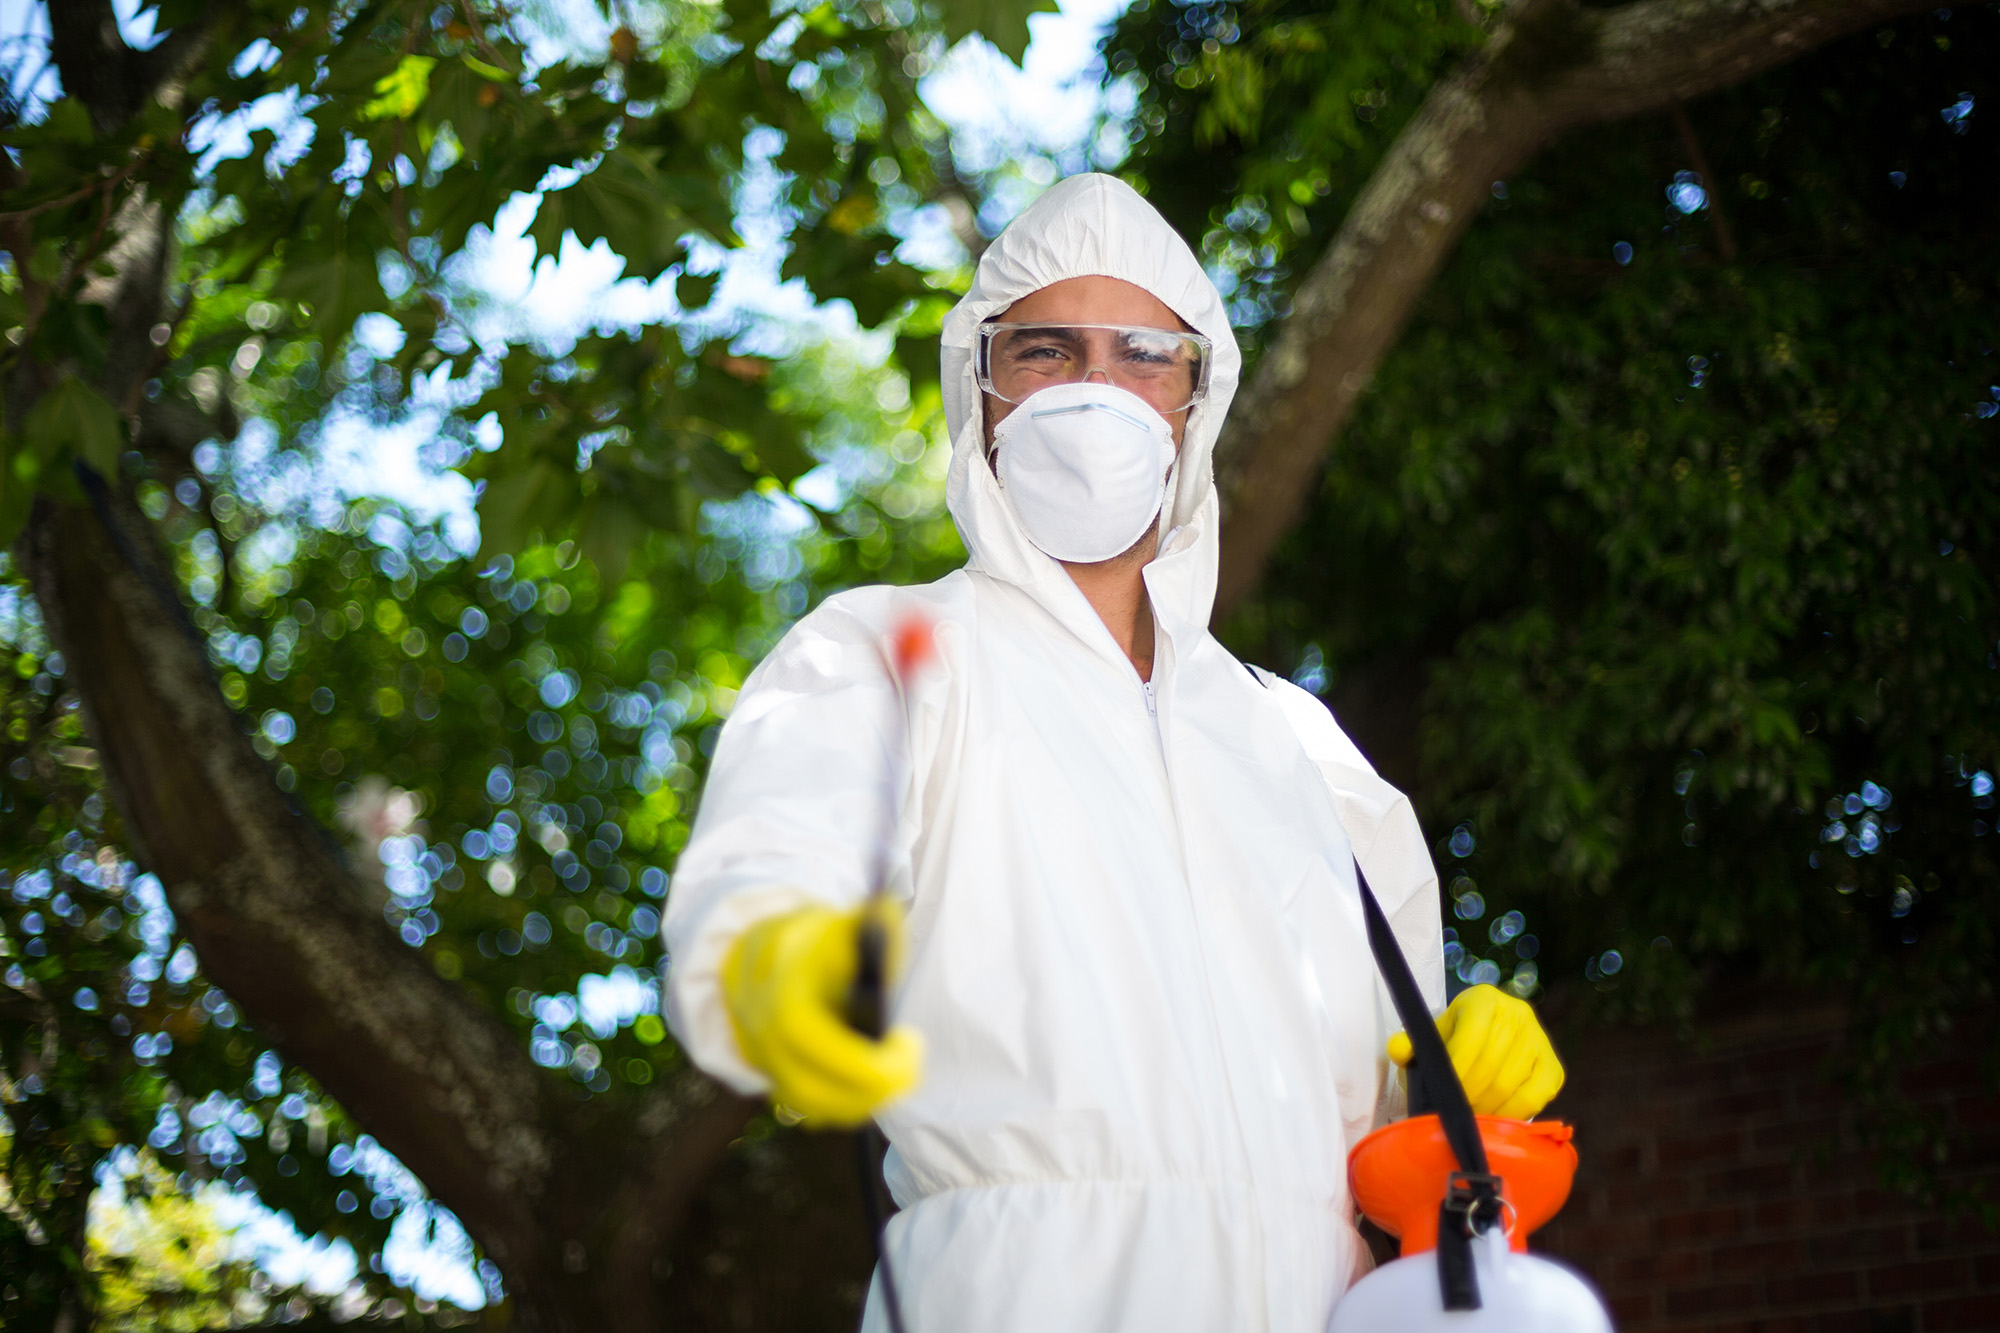 Man spraying insecticide while standing against tree in lawn